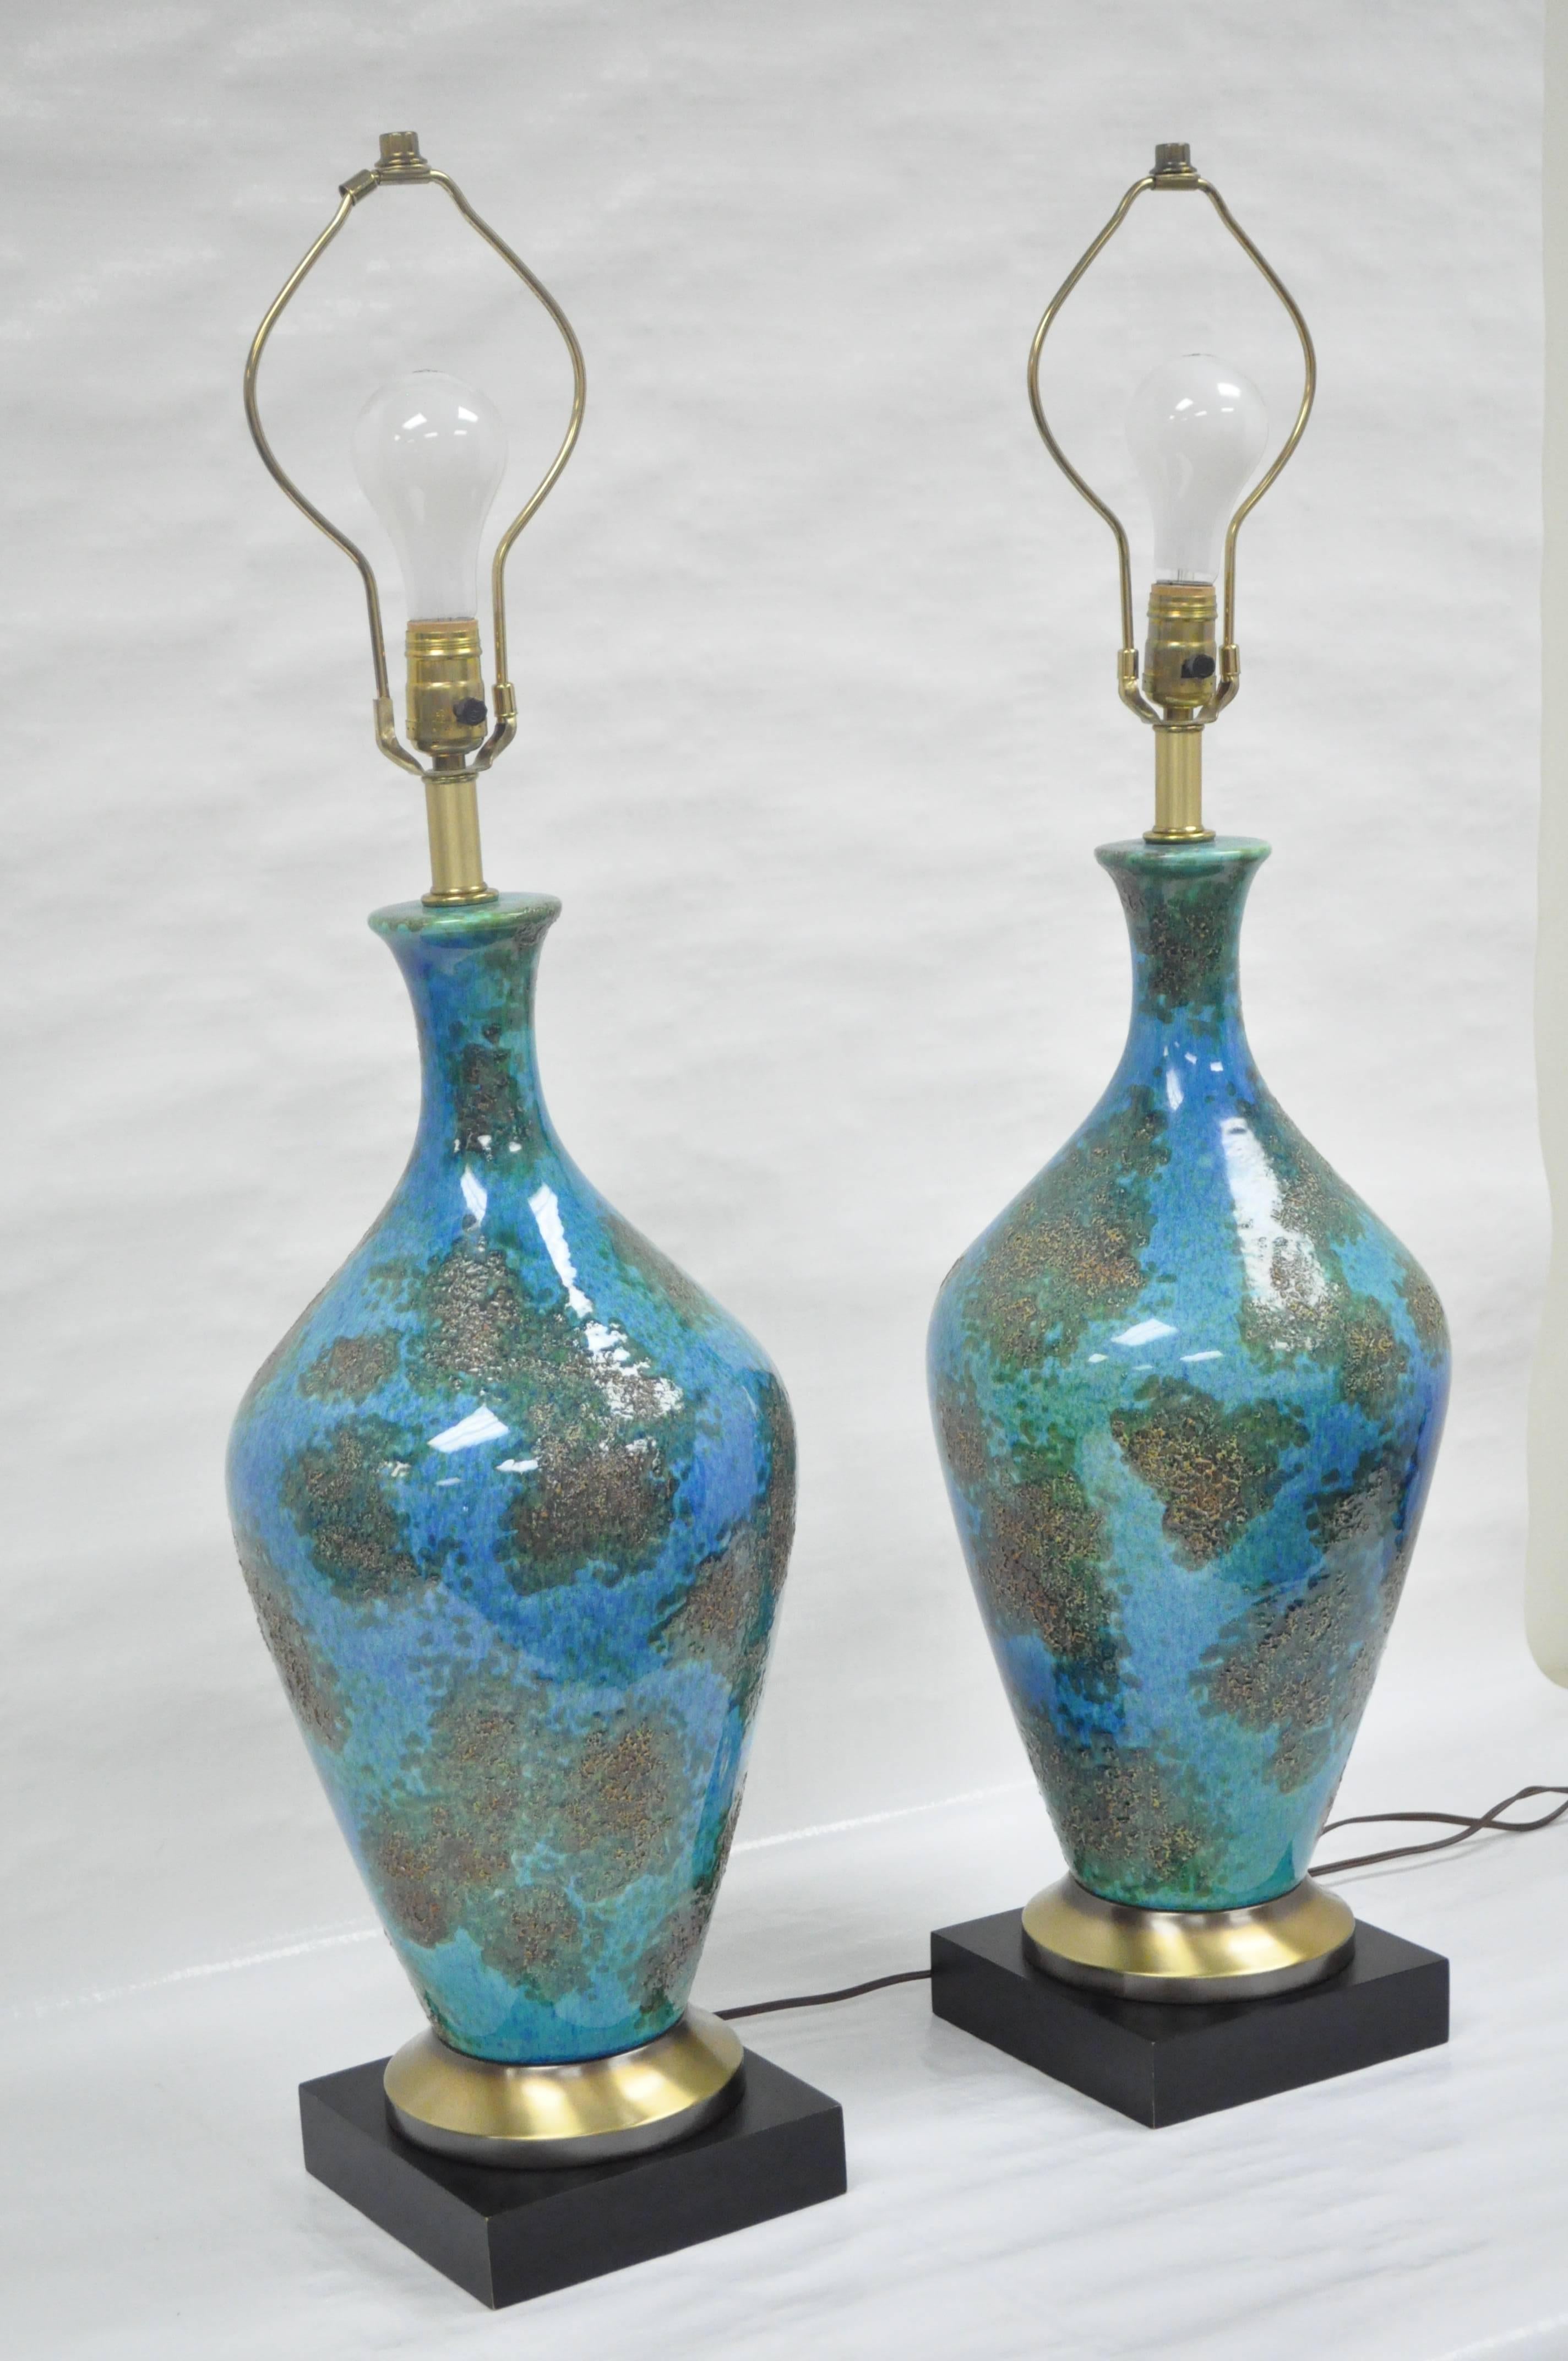 Remarkable pair of quality vintage blue glazed ceramic sculptural table lamps. The pair features glazed ceramic uppers resting on brass and painted wood bases with three-way sockets.